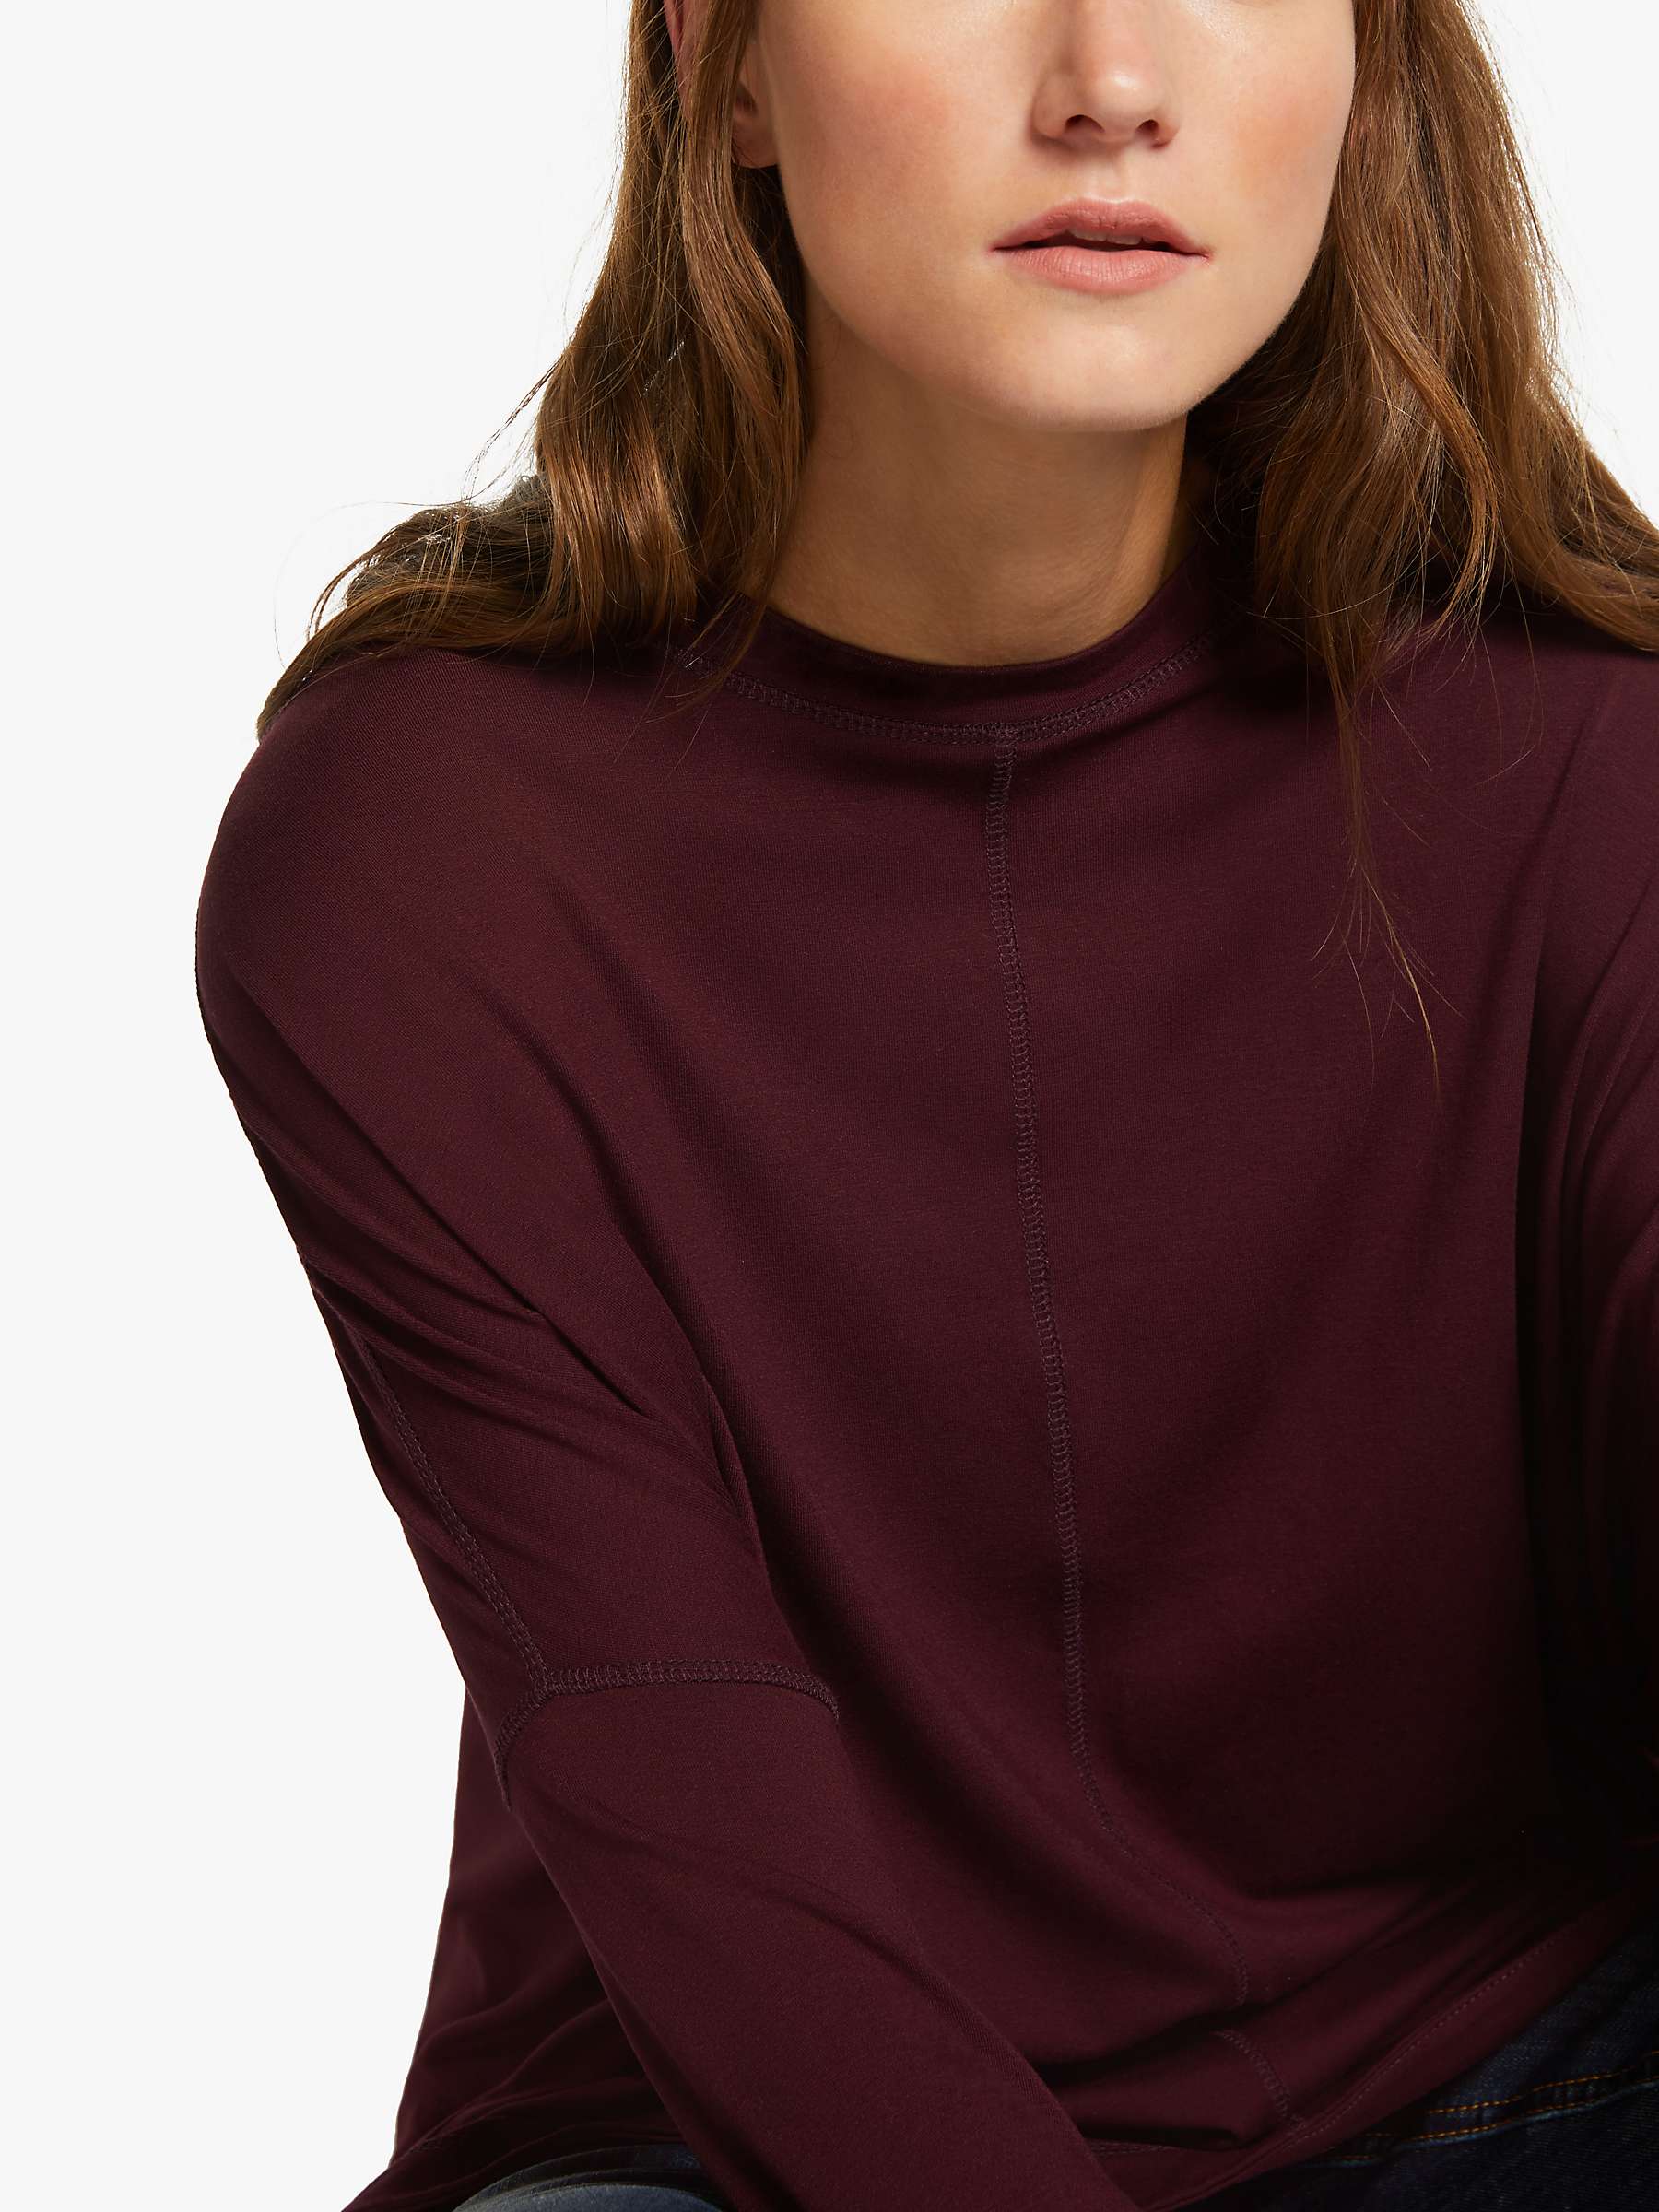 AND/OR Orla Stitch Long Sleeved T-Shirt, Burgundy at John Lewis & Partners